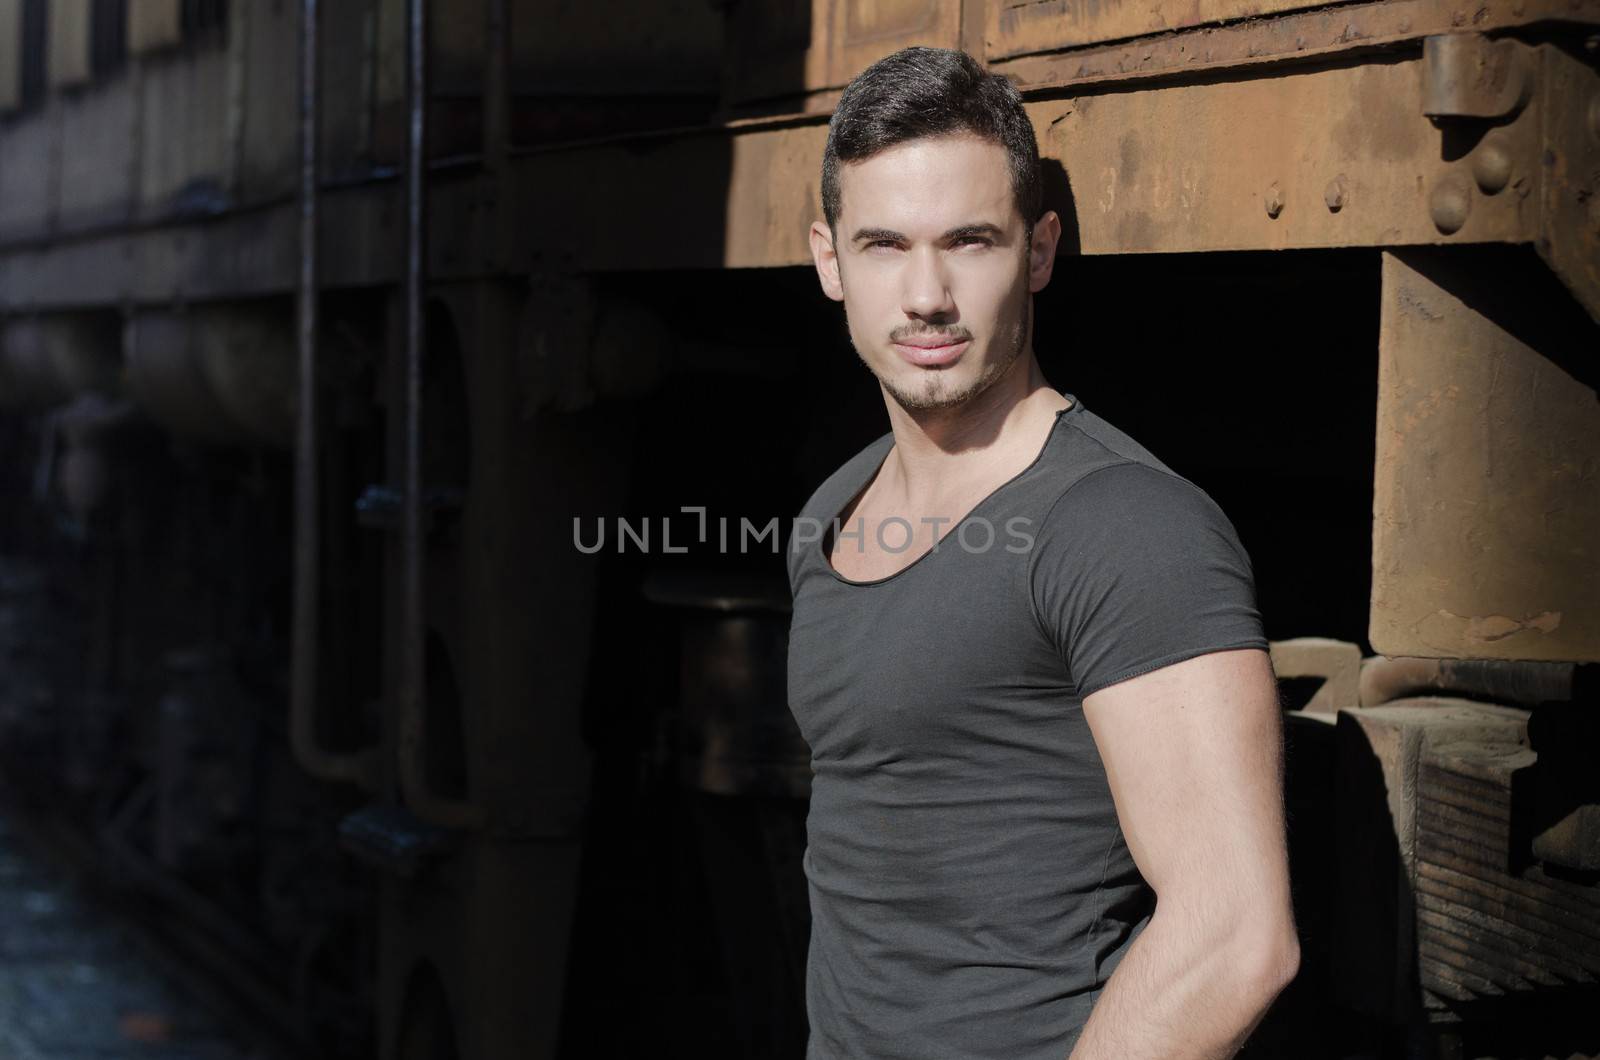 Attractive young man in dark t-shirt in front of old train looking at camera